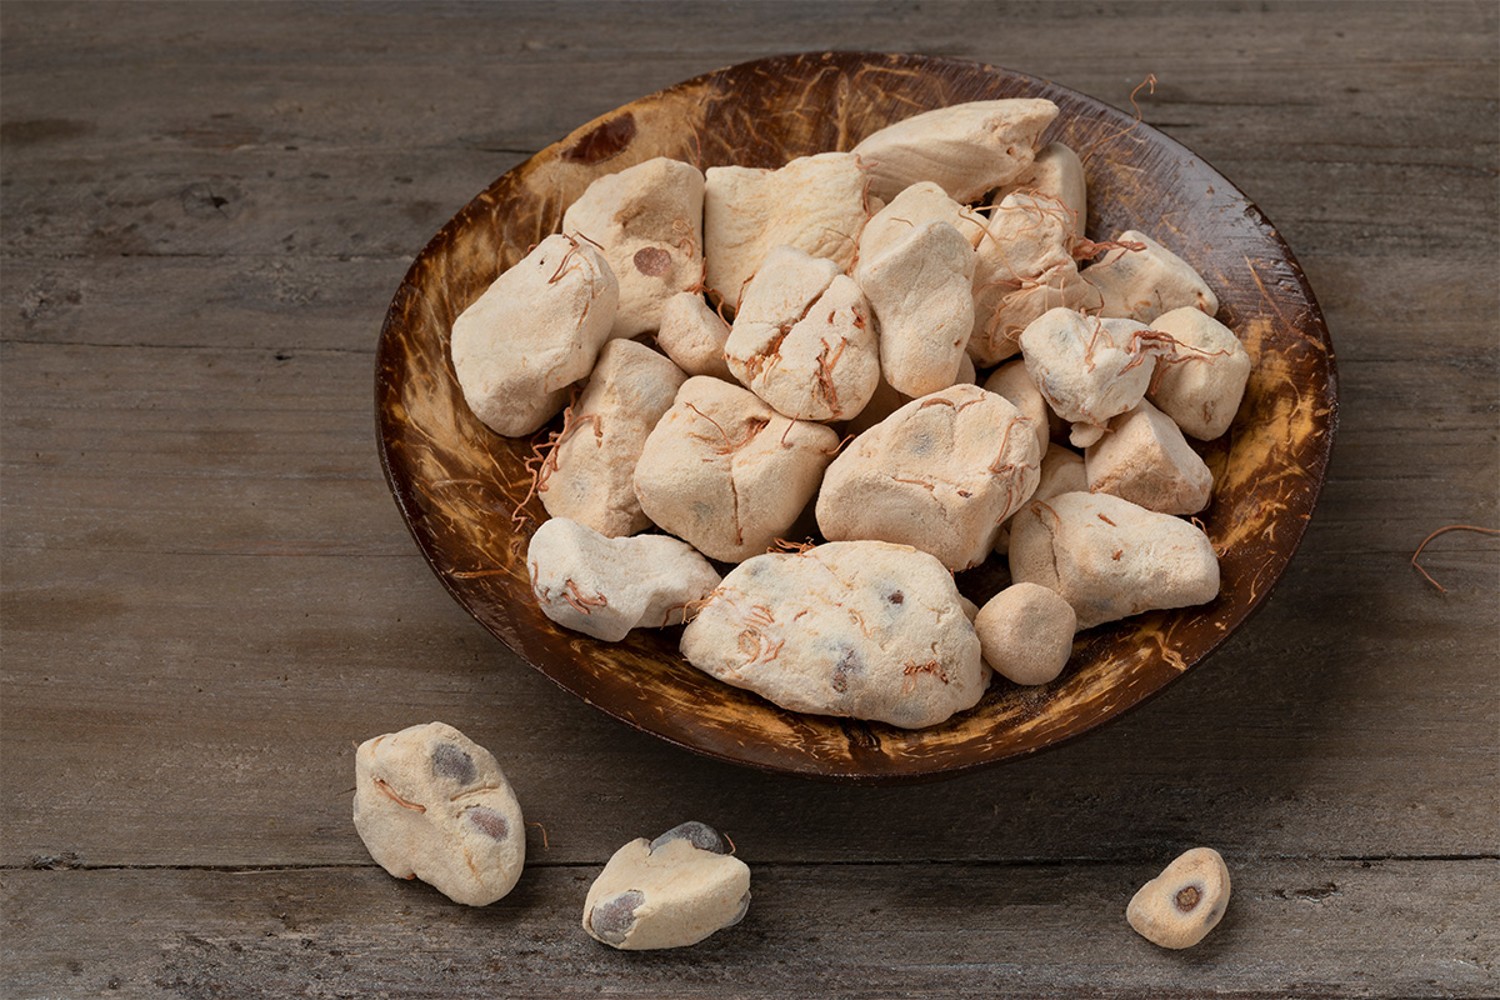 Top 6 Benefits of Baobab Fruit and Powder: A Powerful Superfood for Your Health!